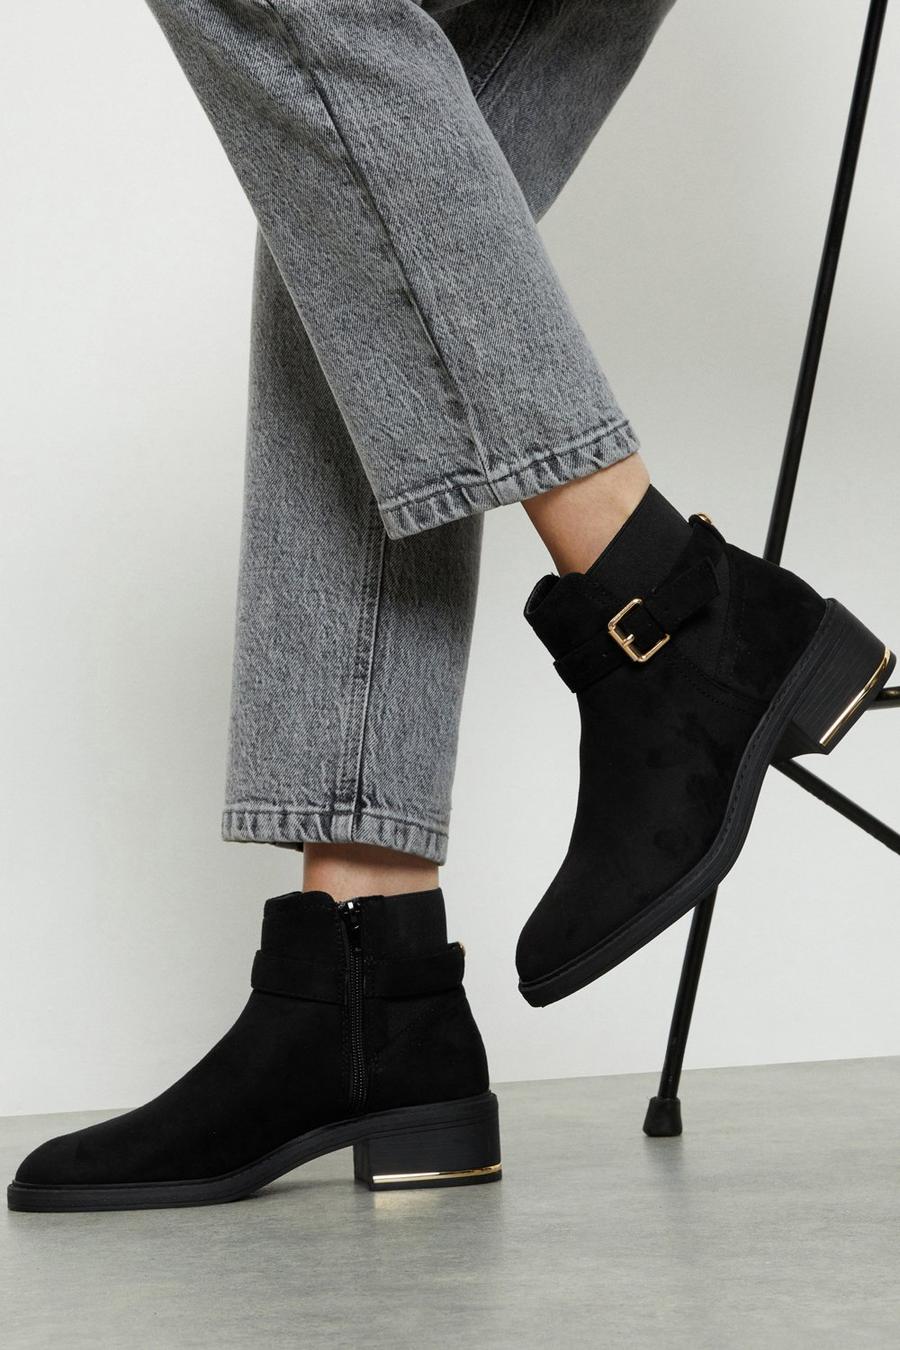 Milly Buckle Detail Ankle Boots